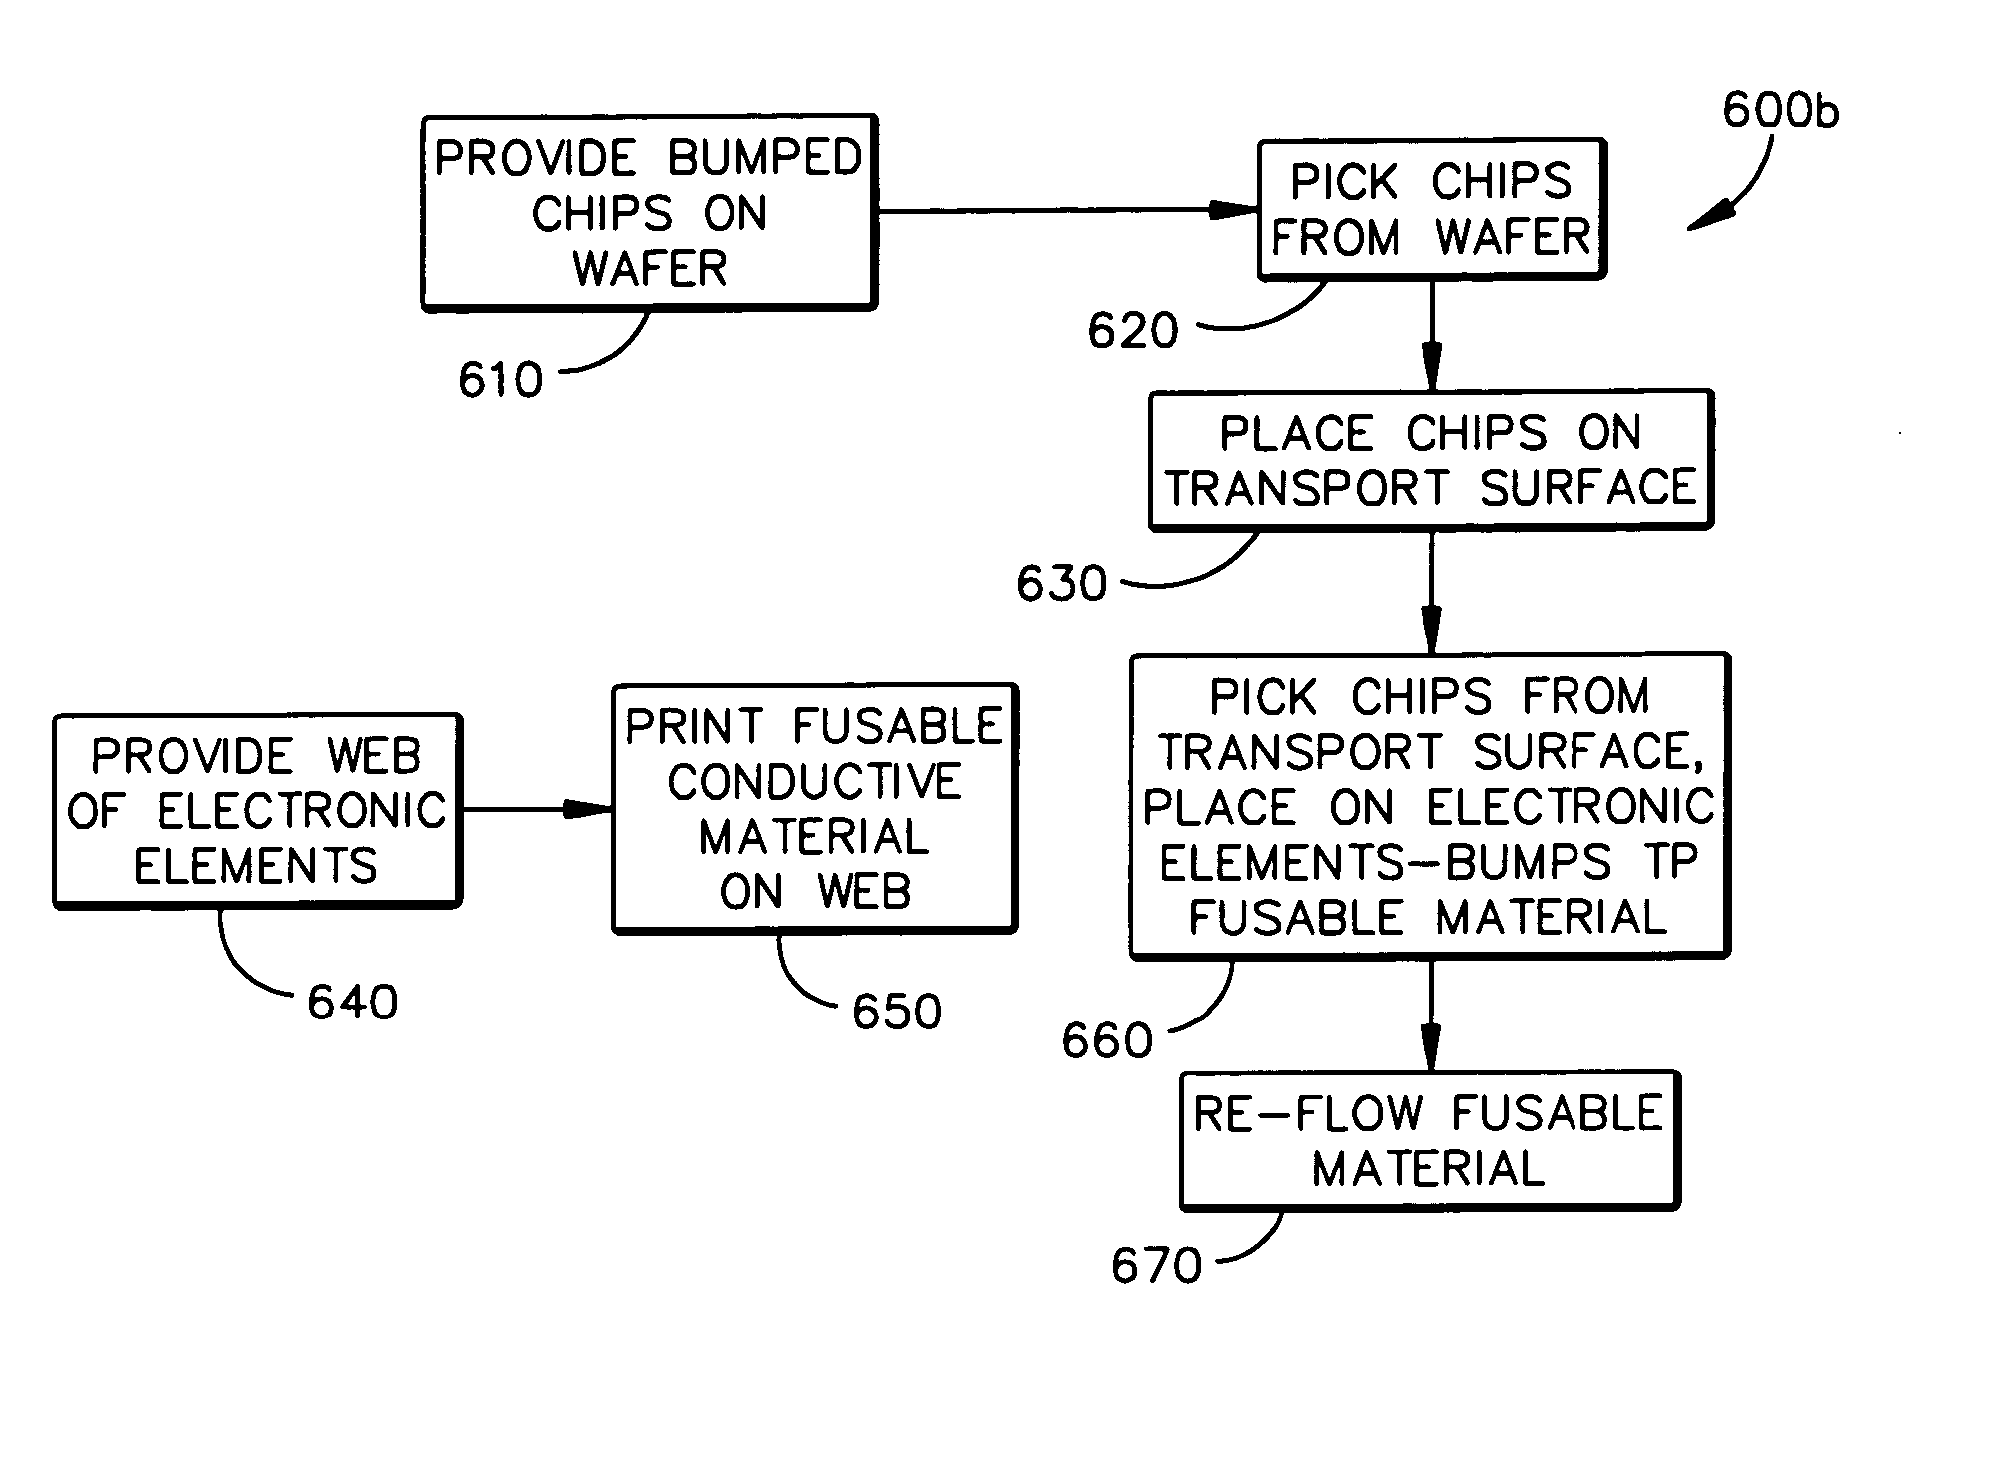 High density bonding of electrical devices